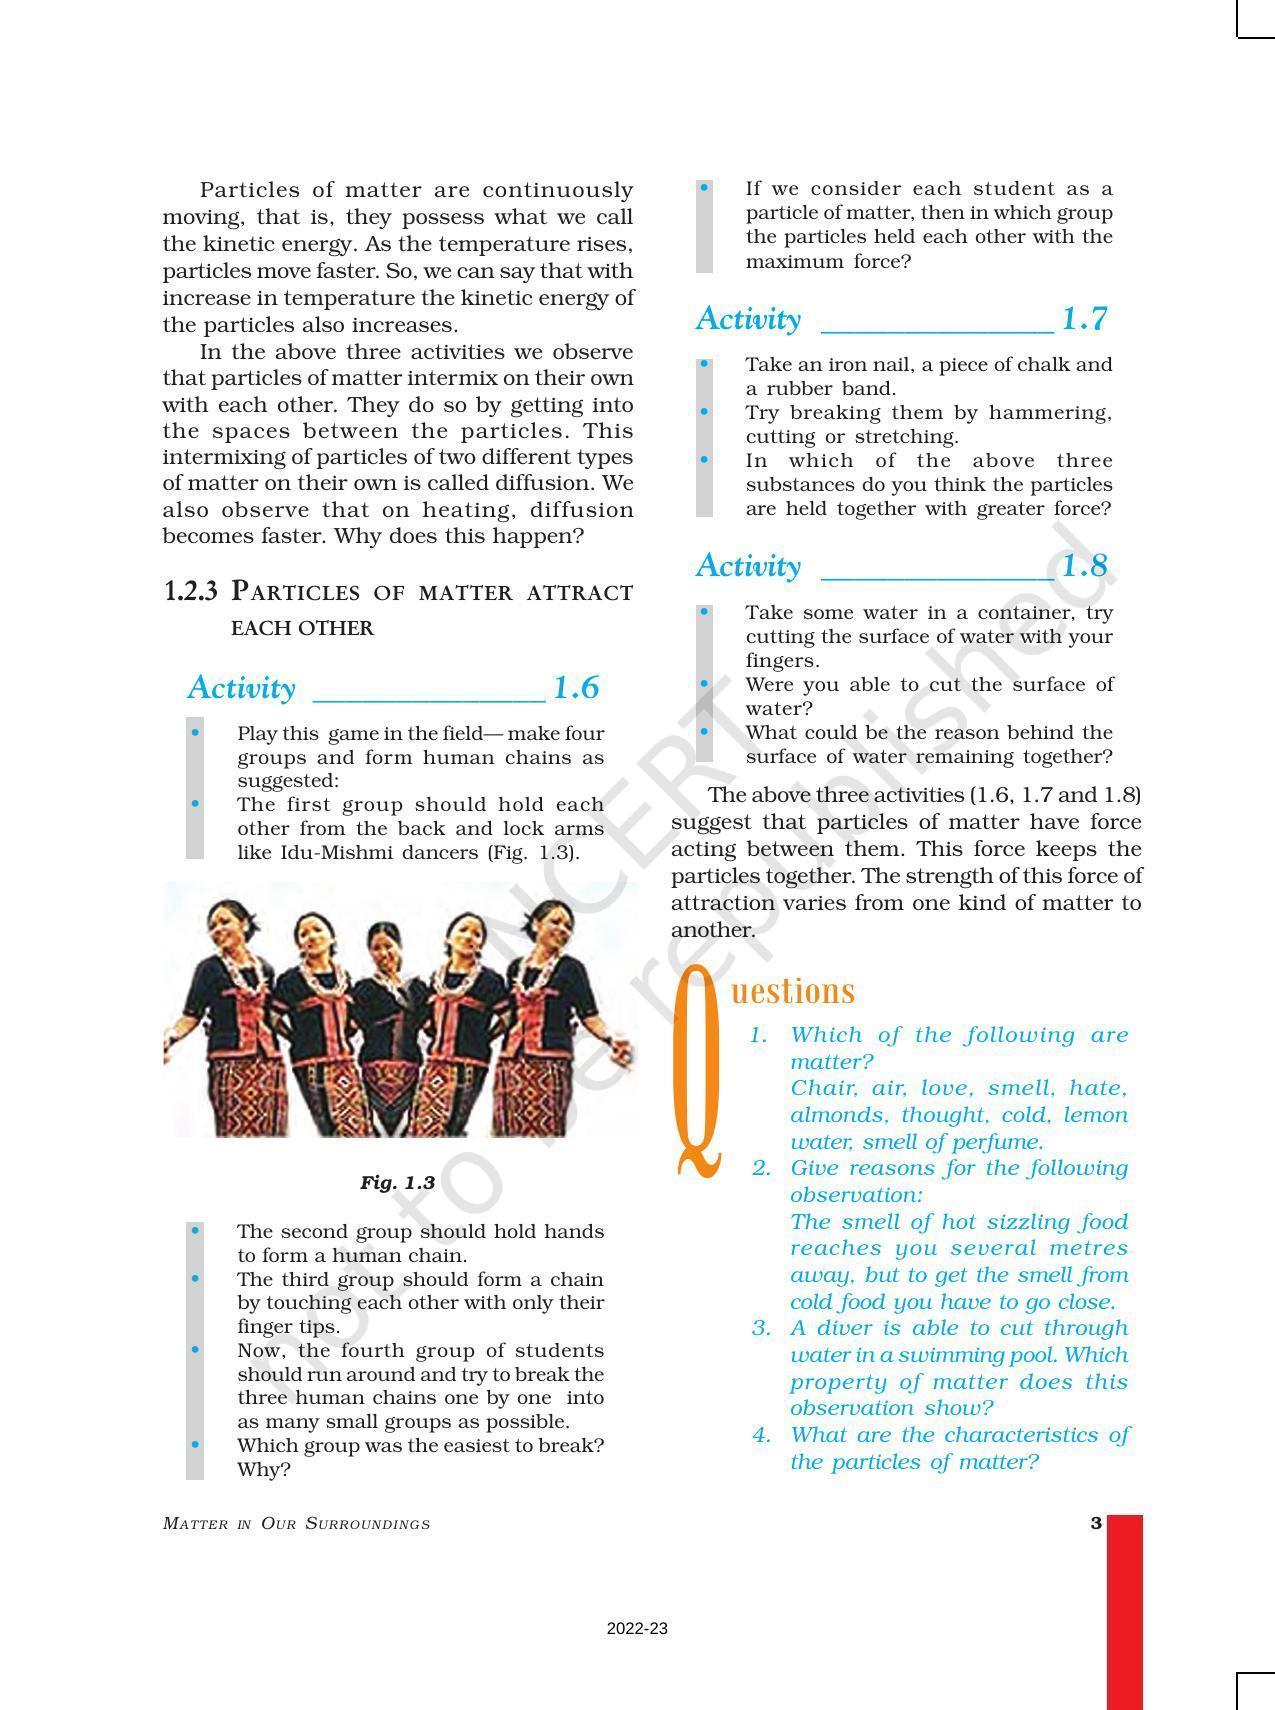 NCERT Book for Class 9 Science Chapter 1 Matter in Our Surroundings - Page 3